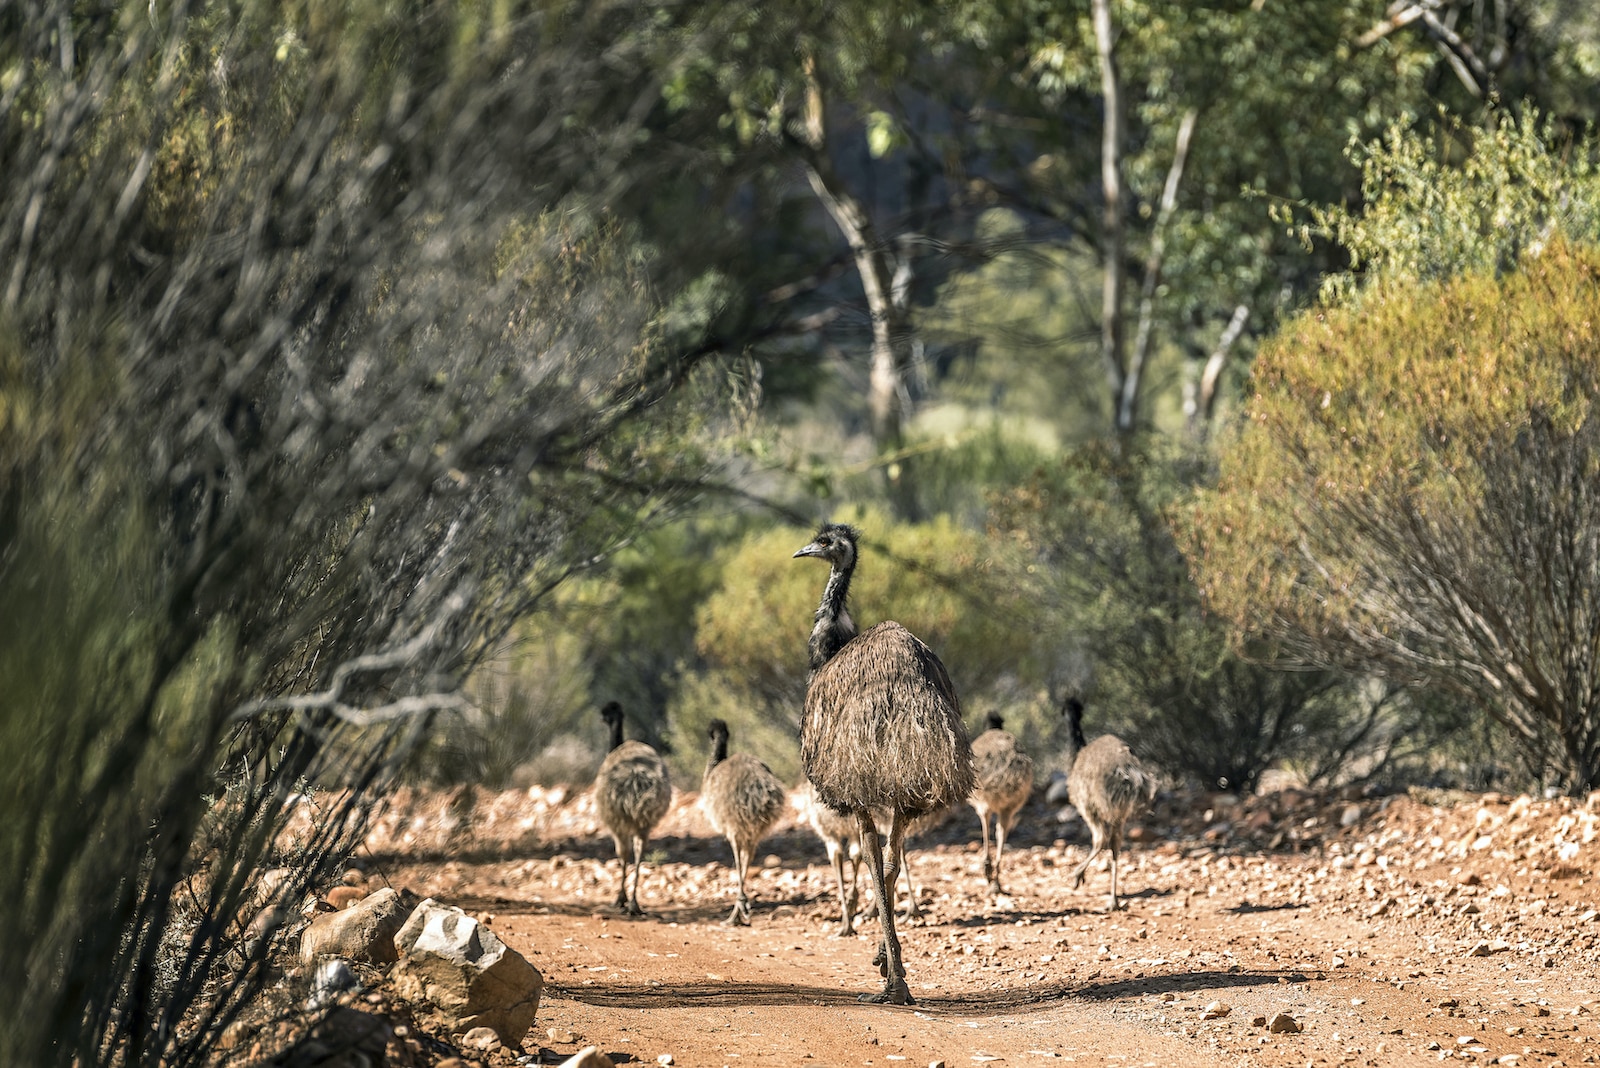 The work of the rangers caring for the Nantawarrina Indigenous Protected Area supports a variety of iconic Australian animals. Credit Annette Ruzika and Country Needs People.